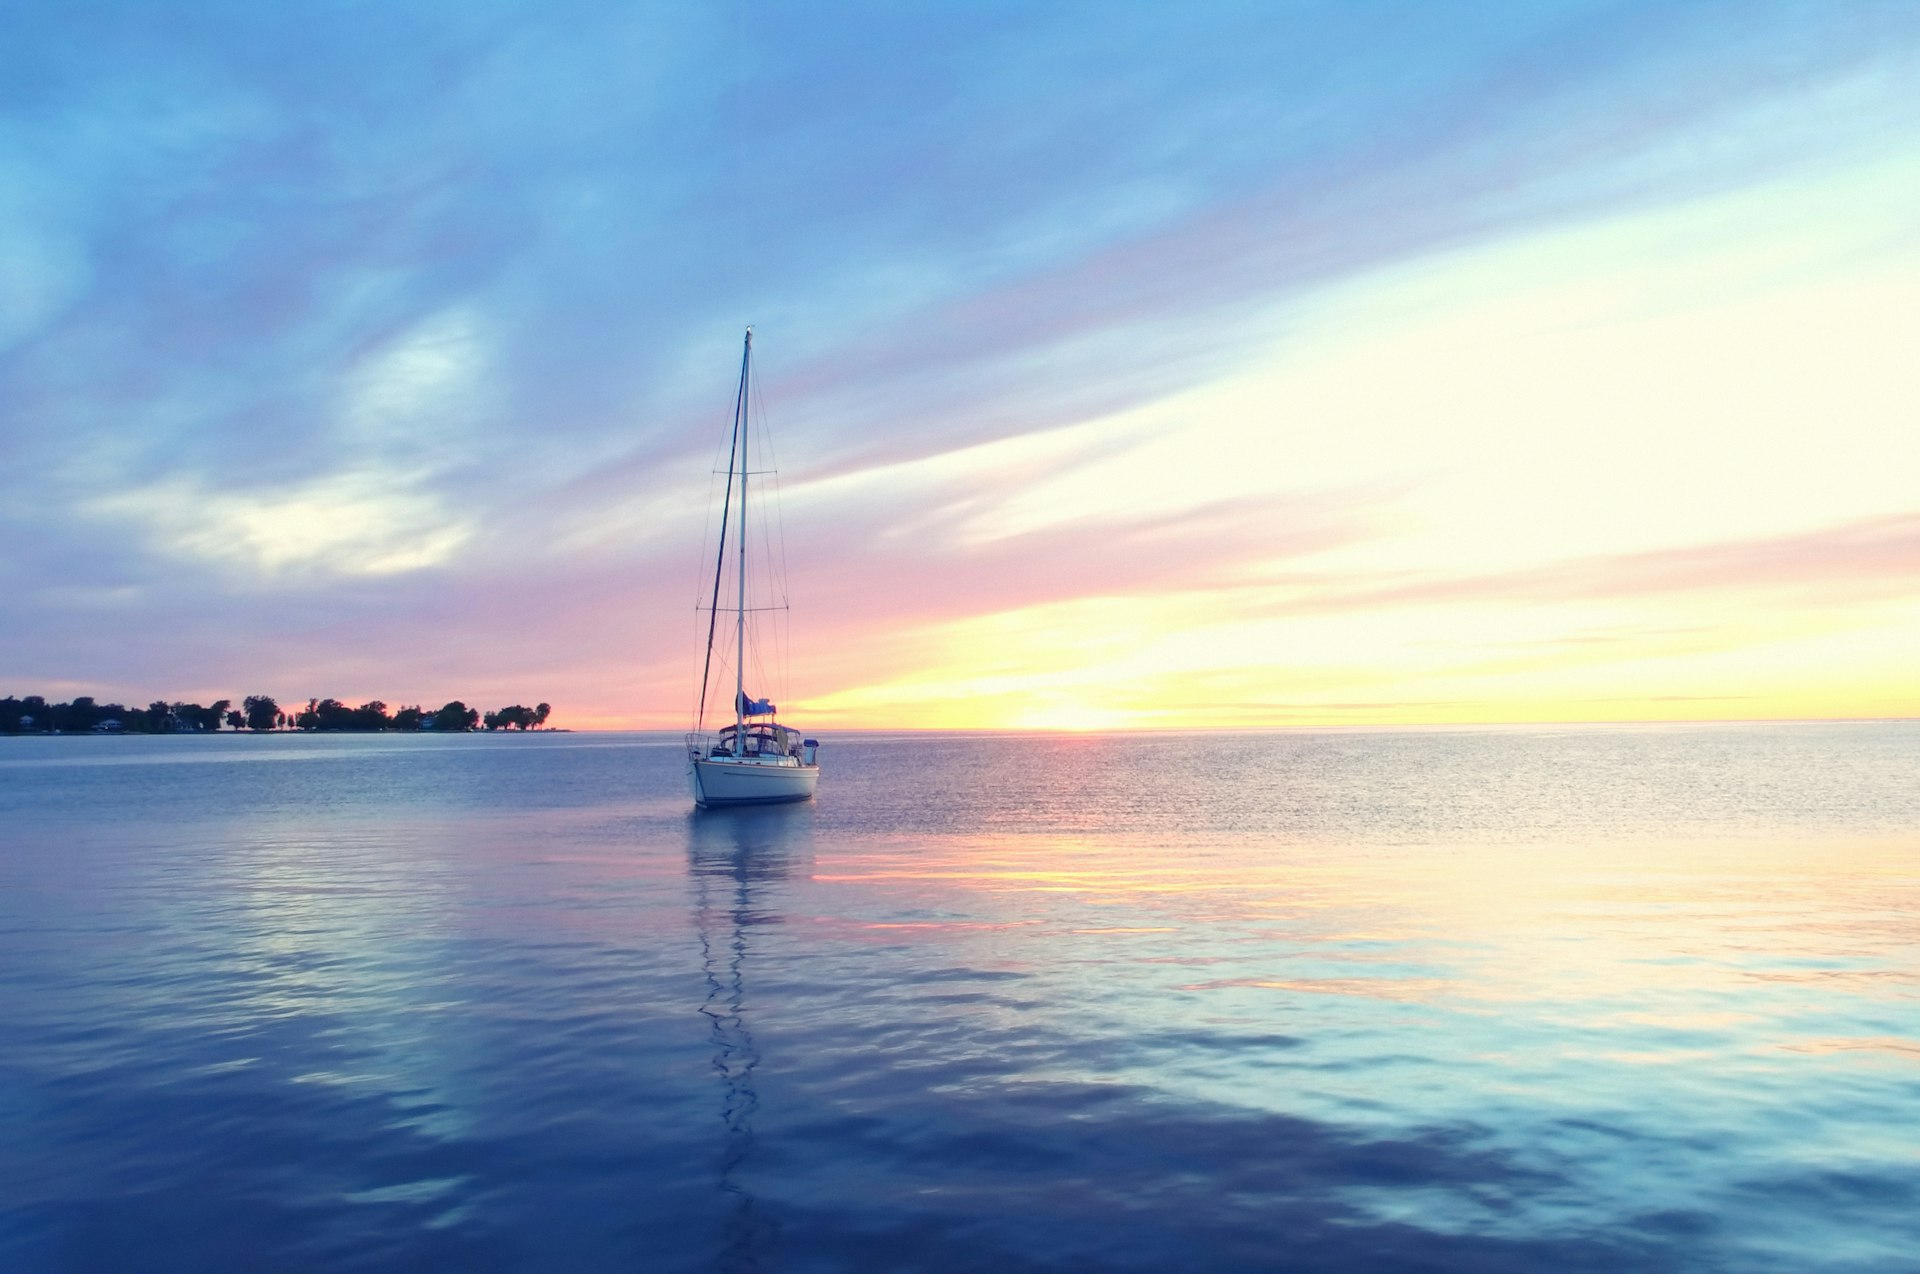 A single sail boat anchored in calm waters as the sunset casts pastel colors across the sky